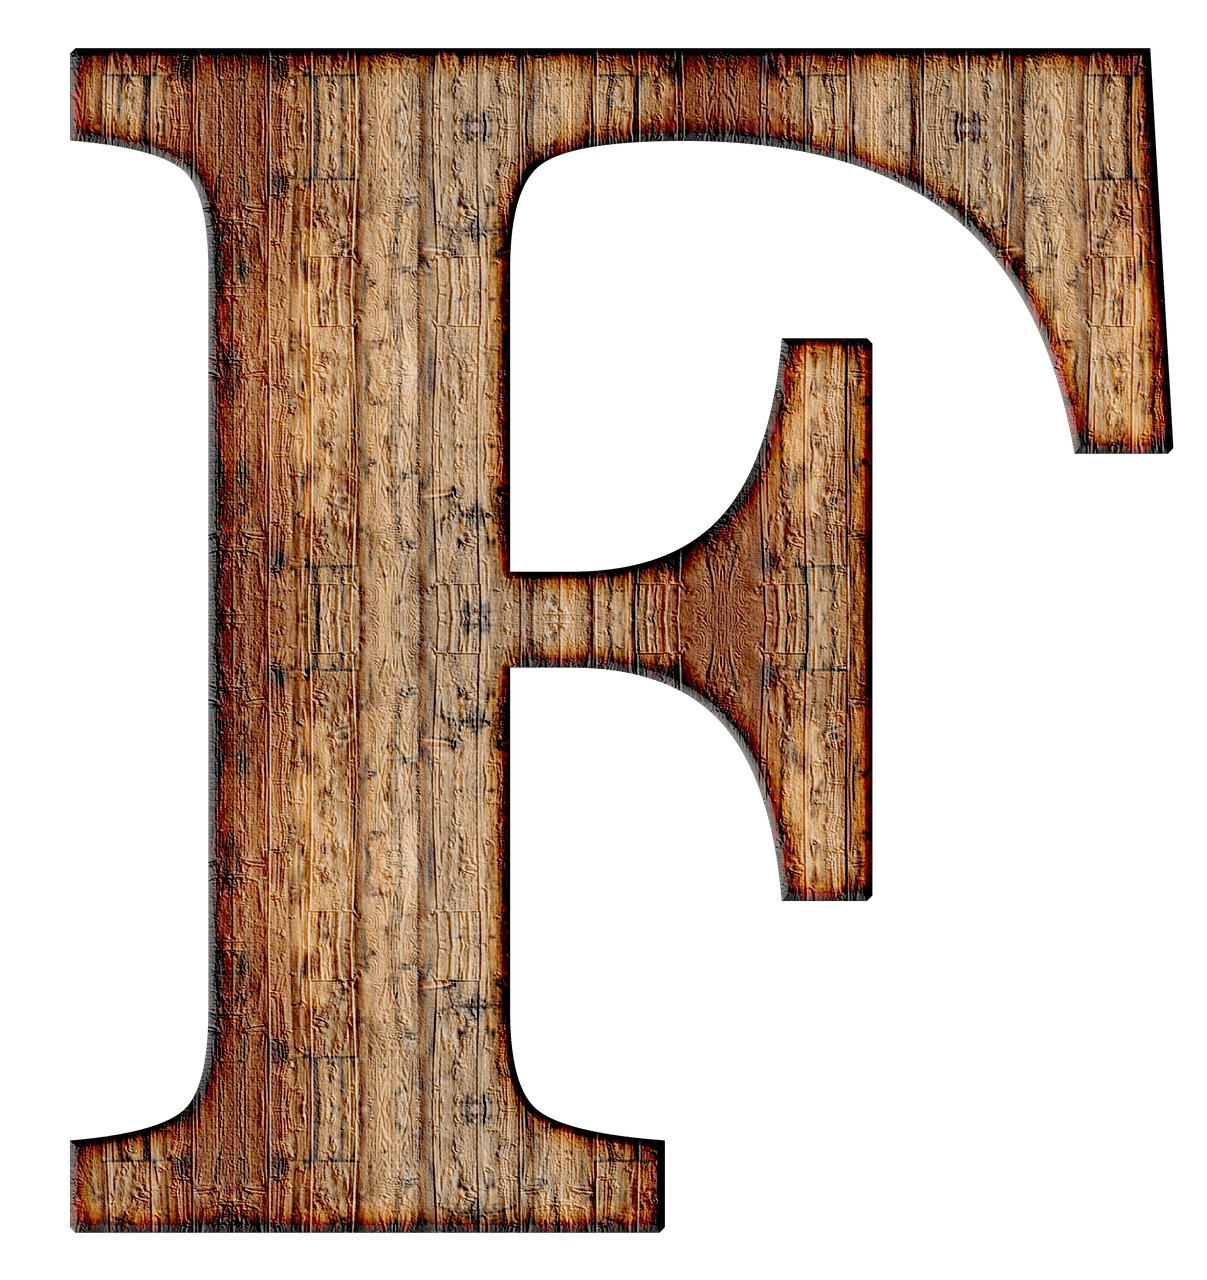 Wooden Capital Letter F icons